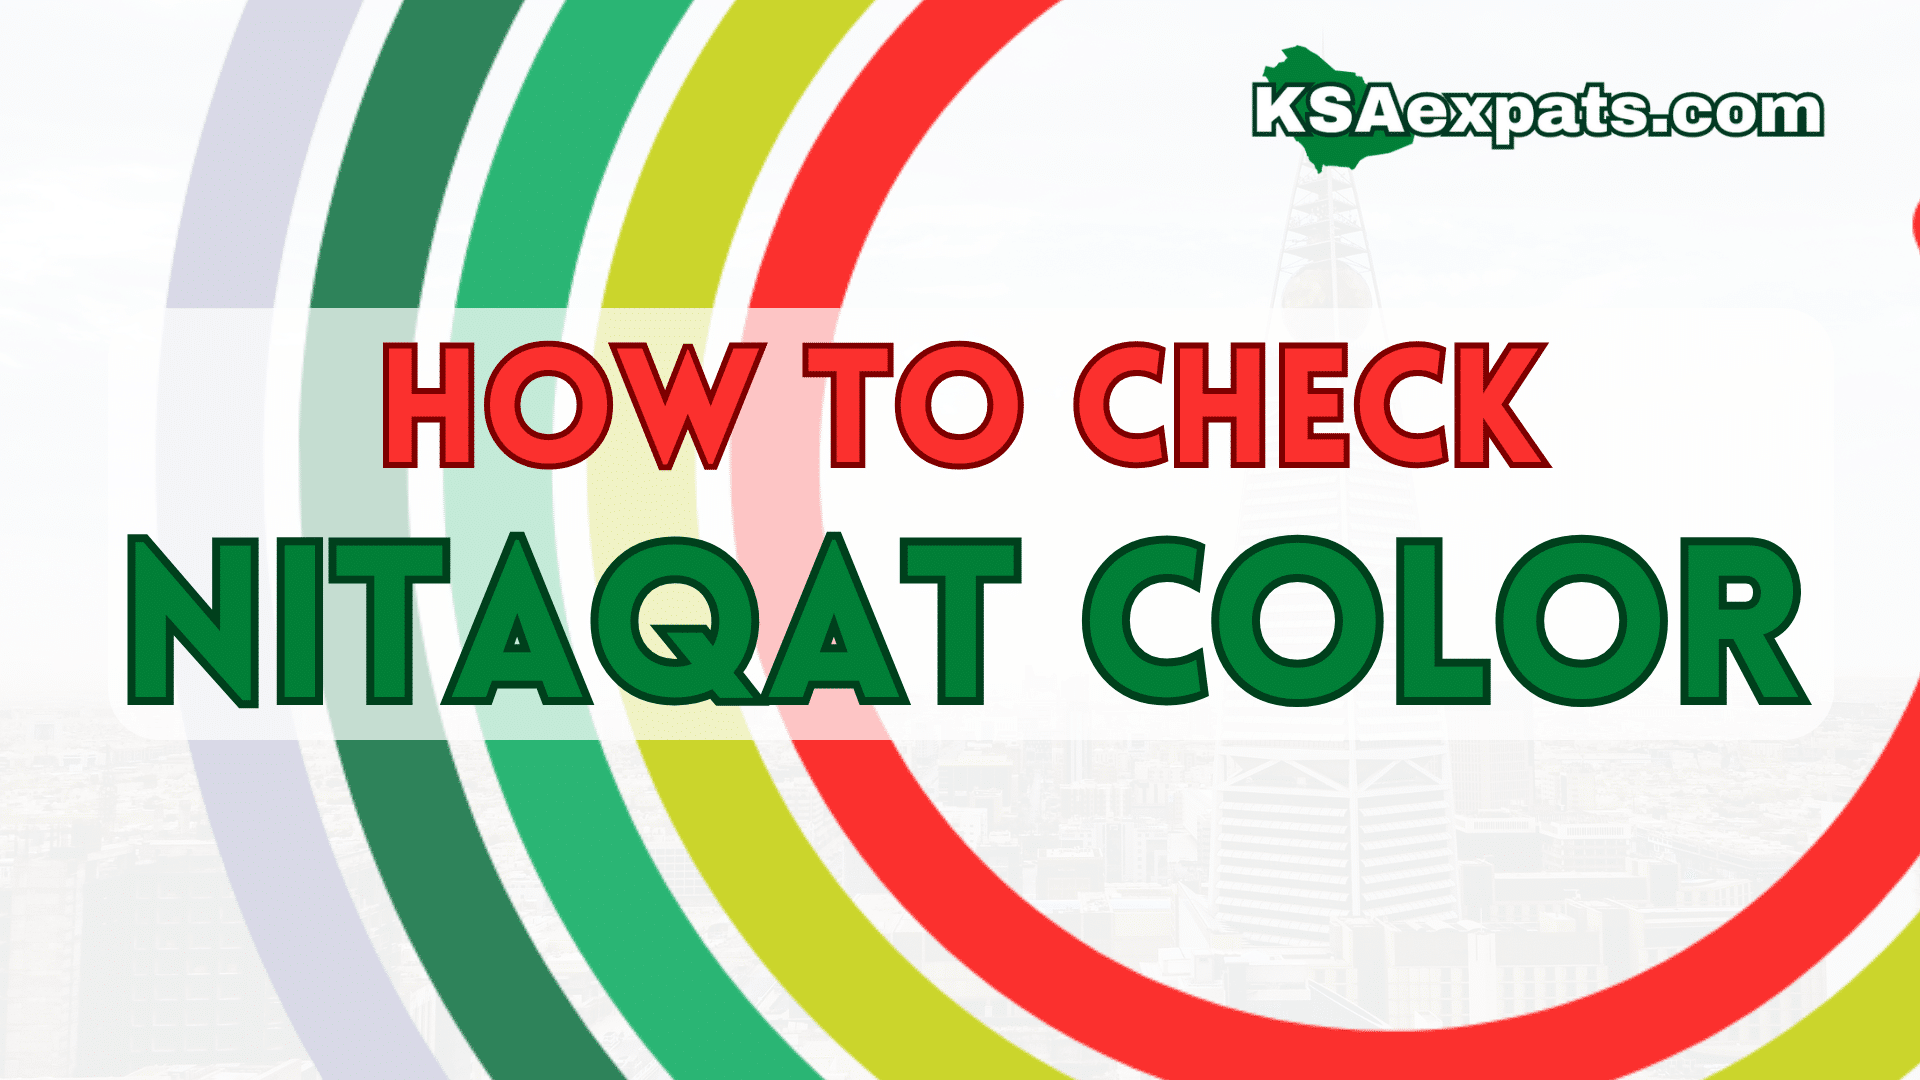 HOW TO CHECK EMPLOYER NITAQAT COLOR CATEGORY